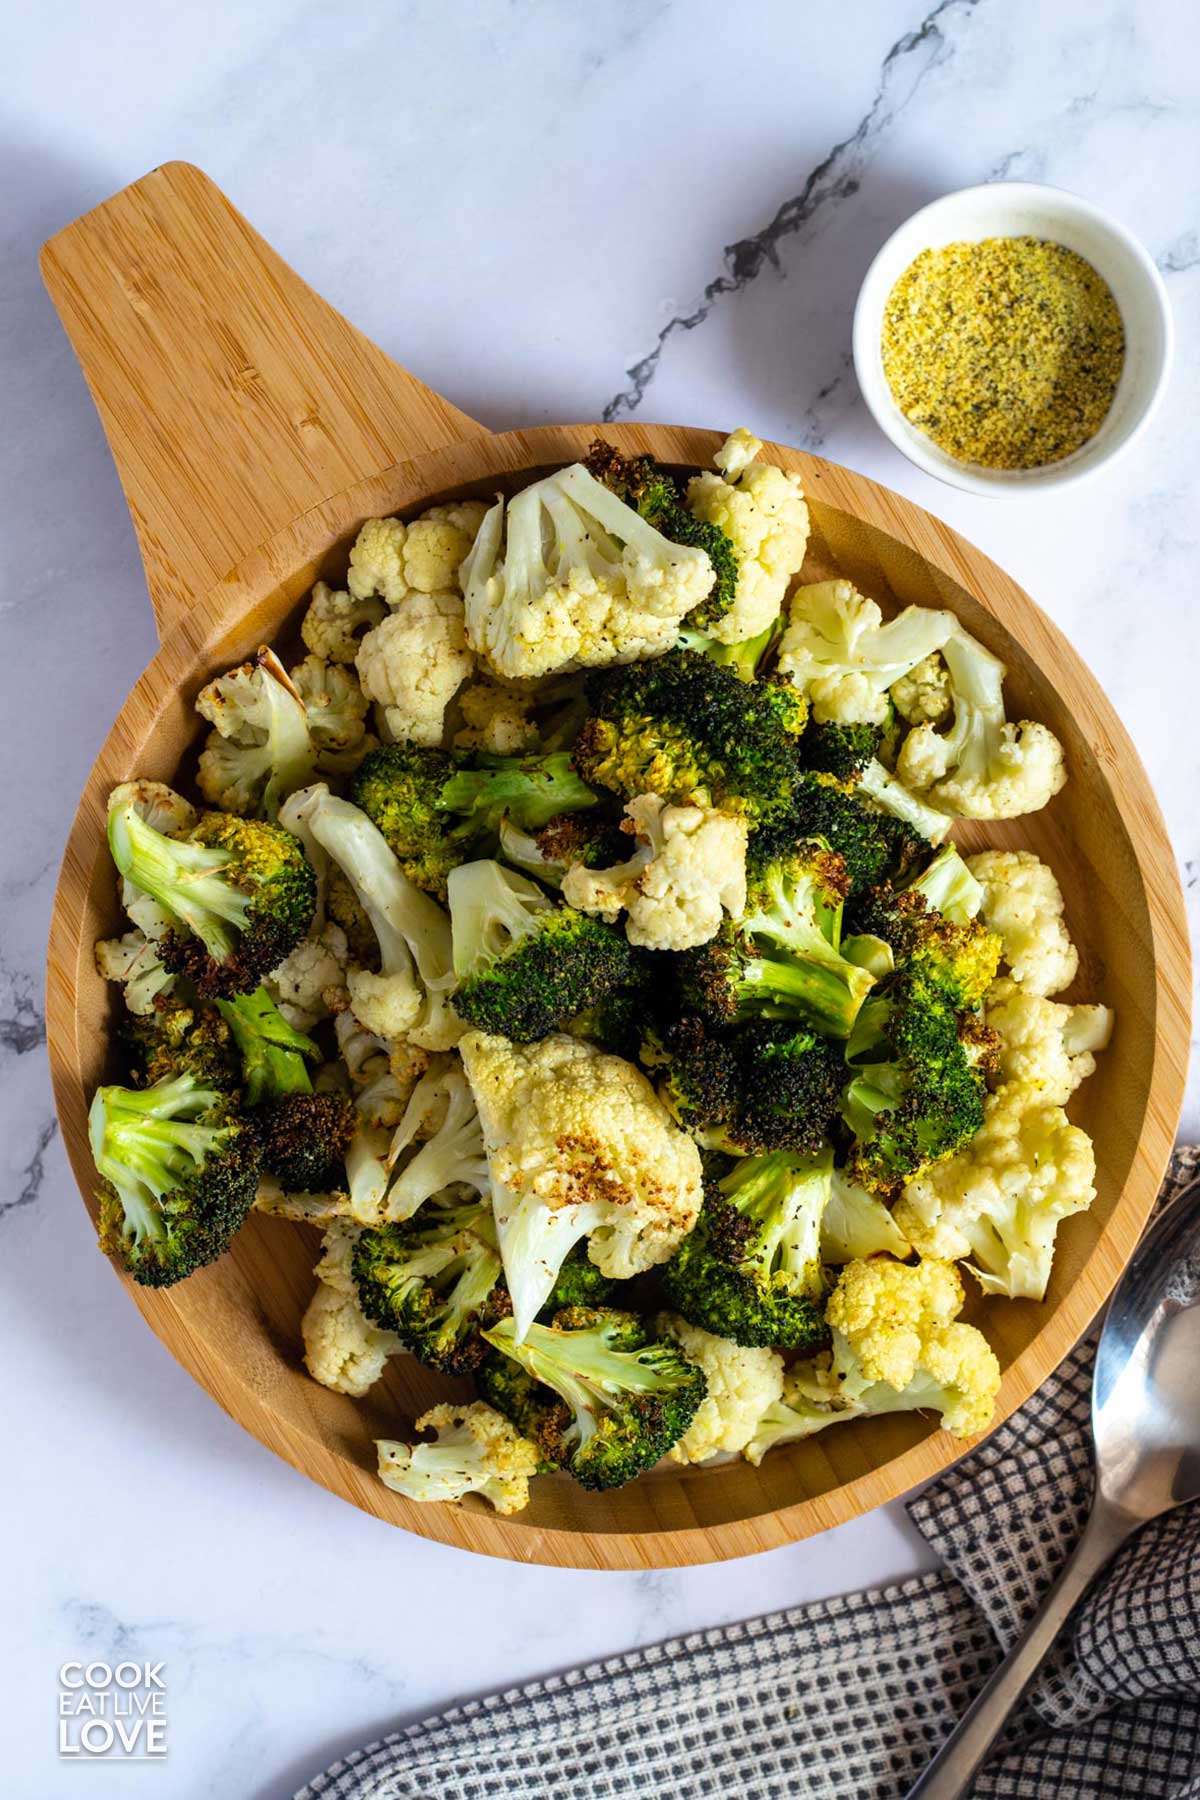 Air fryer broccoli and cauliflower in wooden serving bowl on the table.